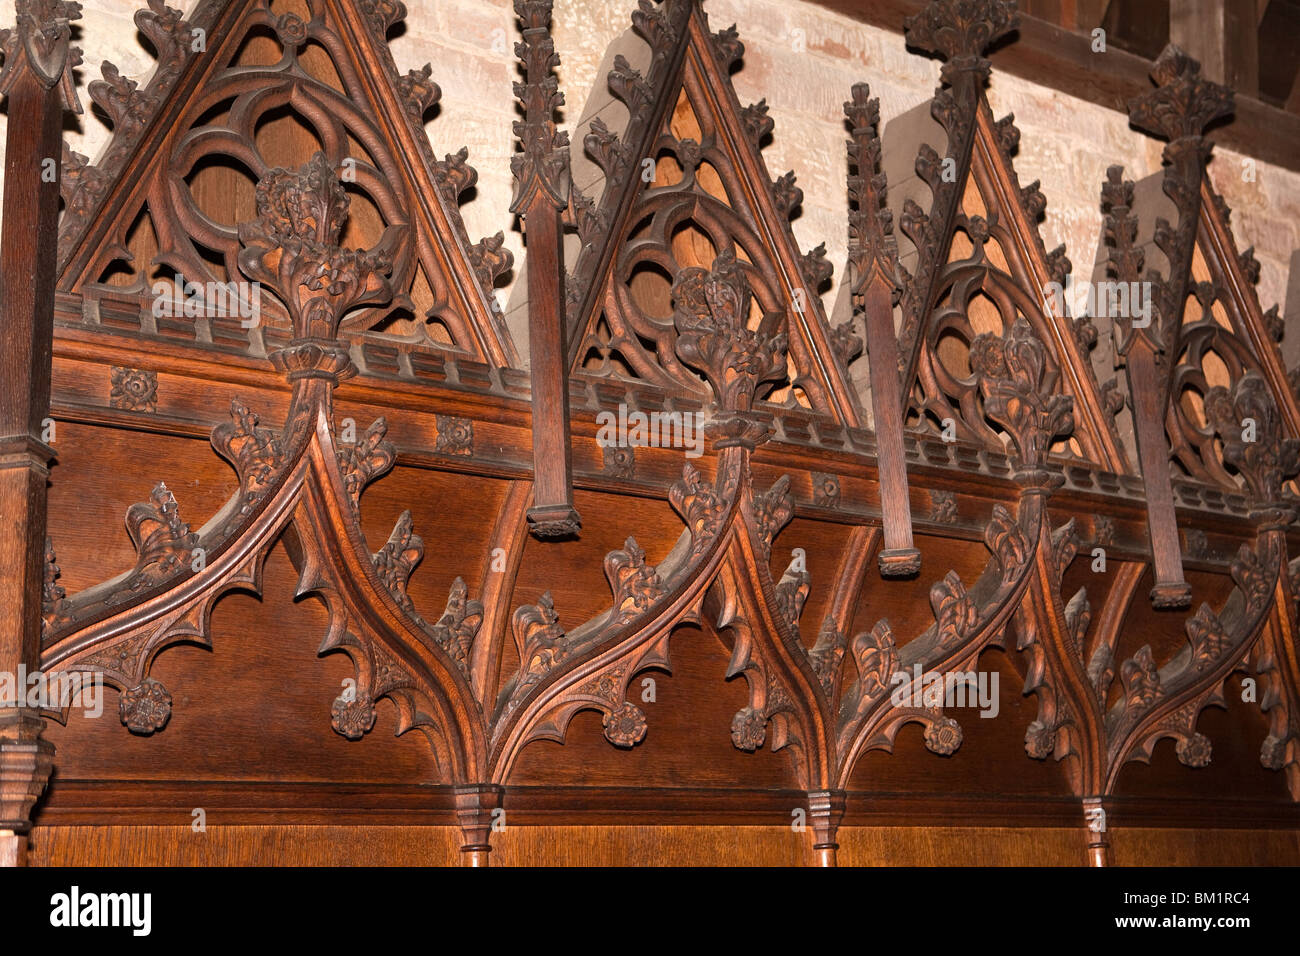 UK, England, Herefordshire, Putley church, ornately carved wooden choir stalls in gothic revival style Stock Photo